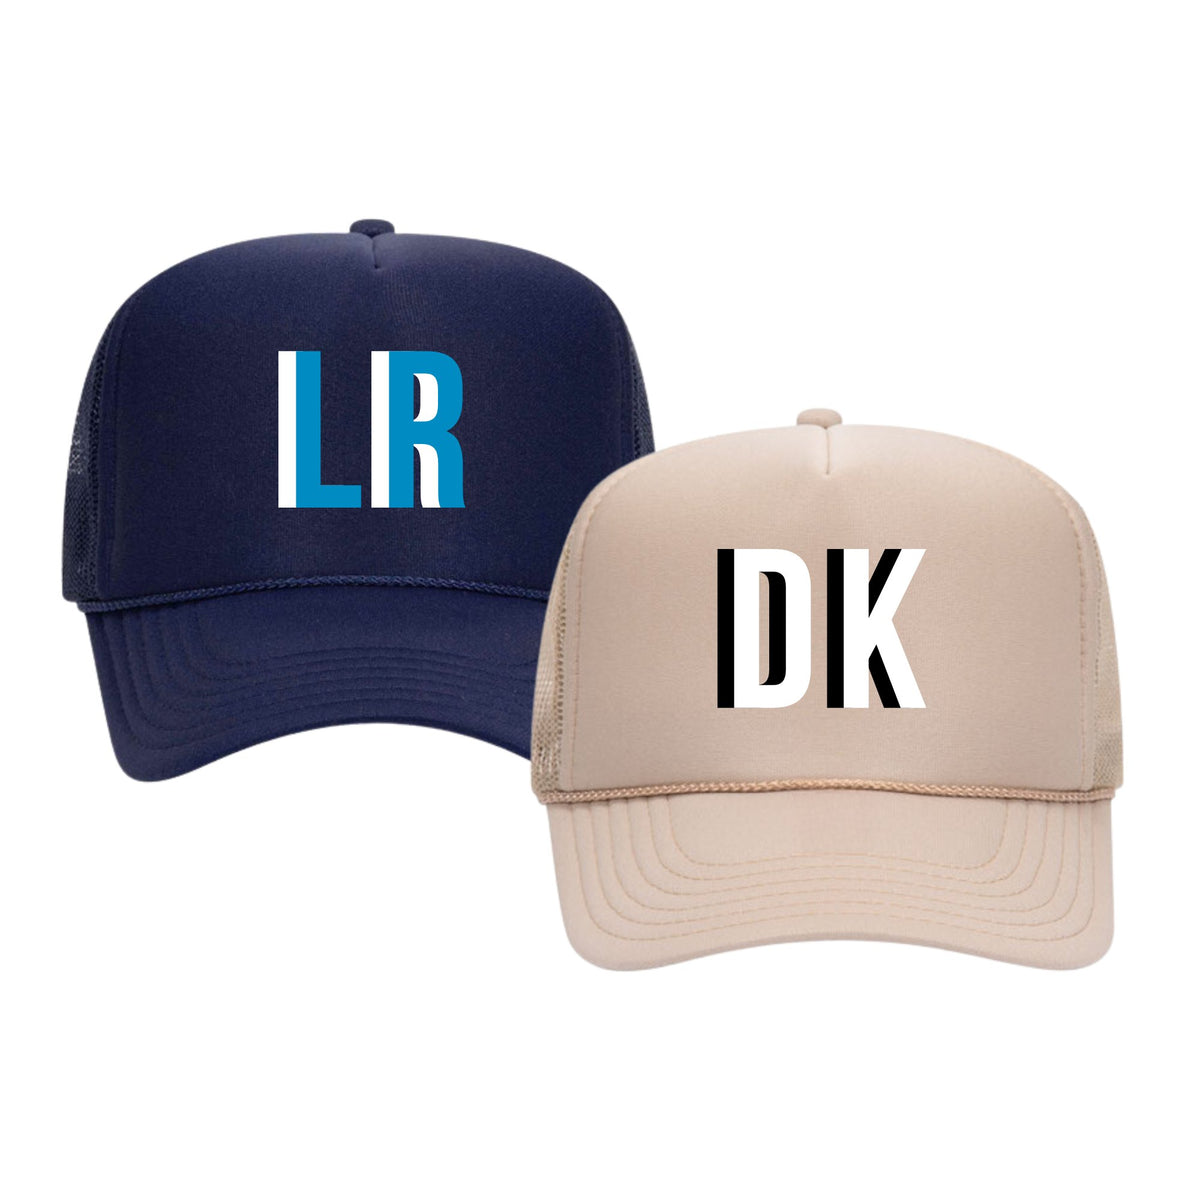 Navy Monogrammed Hat - The Southern Rose Monogram & Gift